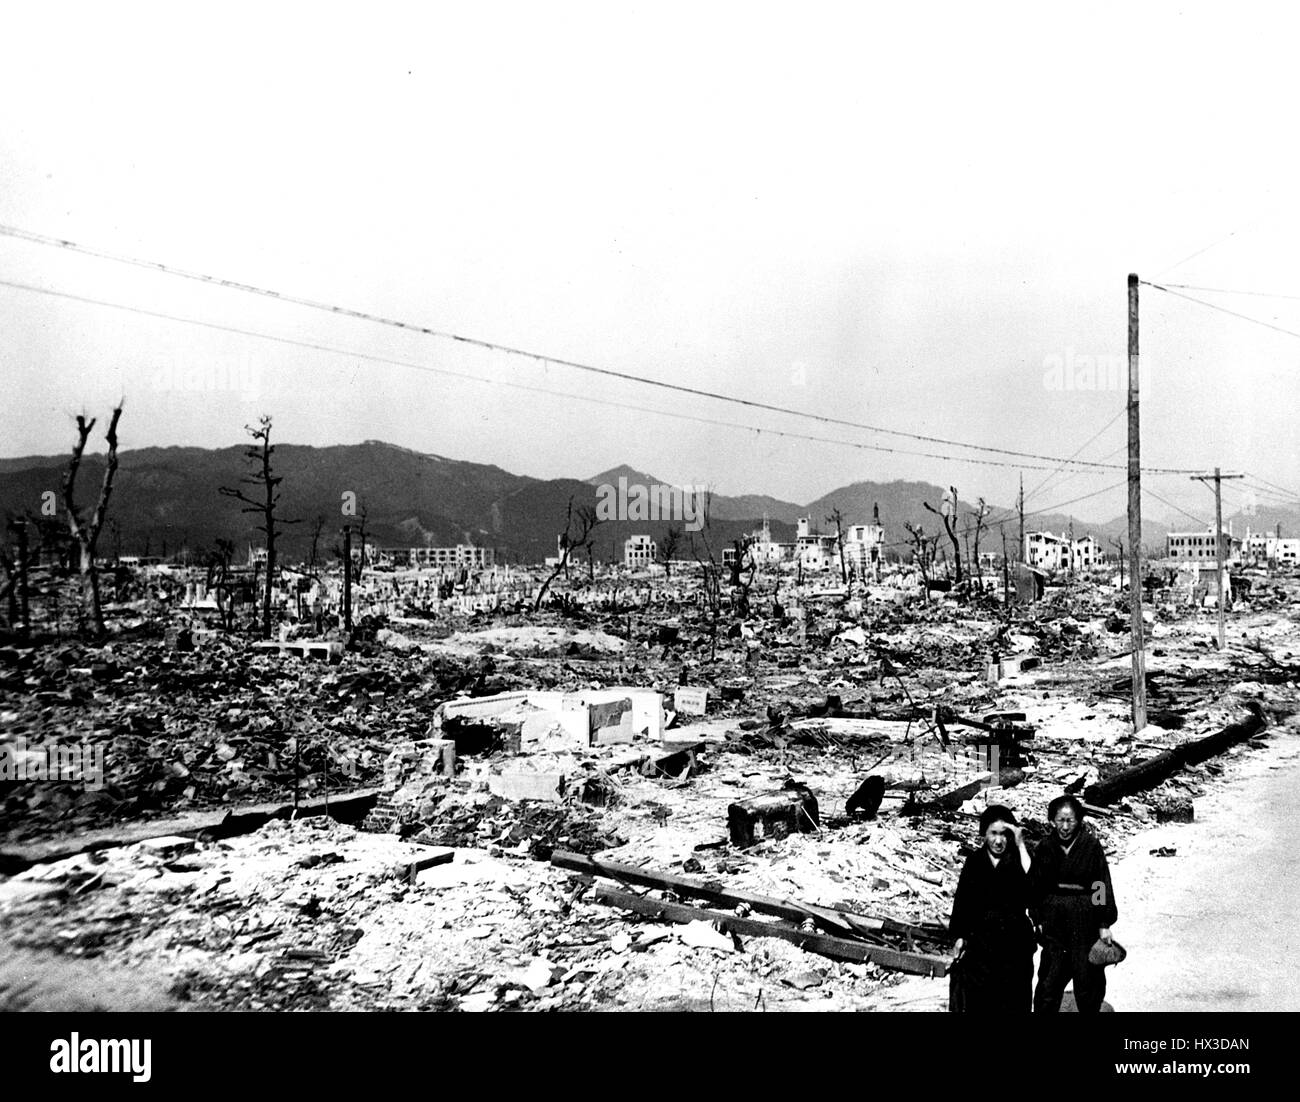 Desolation and dilapidated structures in Hiroshima following the atomic bombing of Japan, 1945. Image courtesy US Department of Energy. Stock Photo